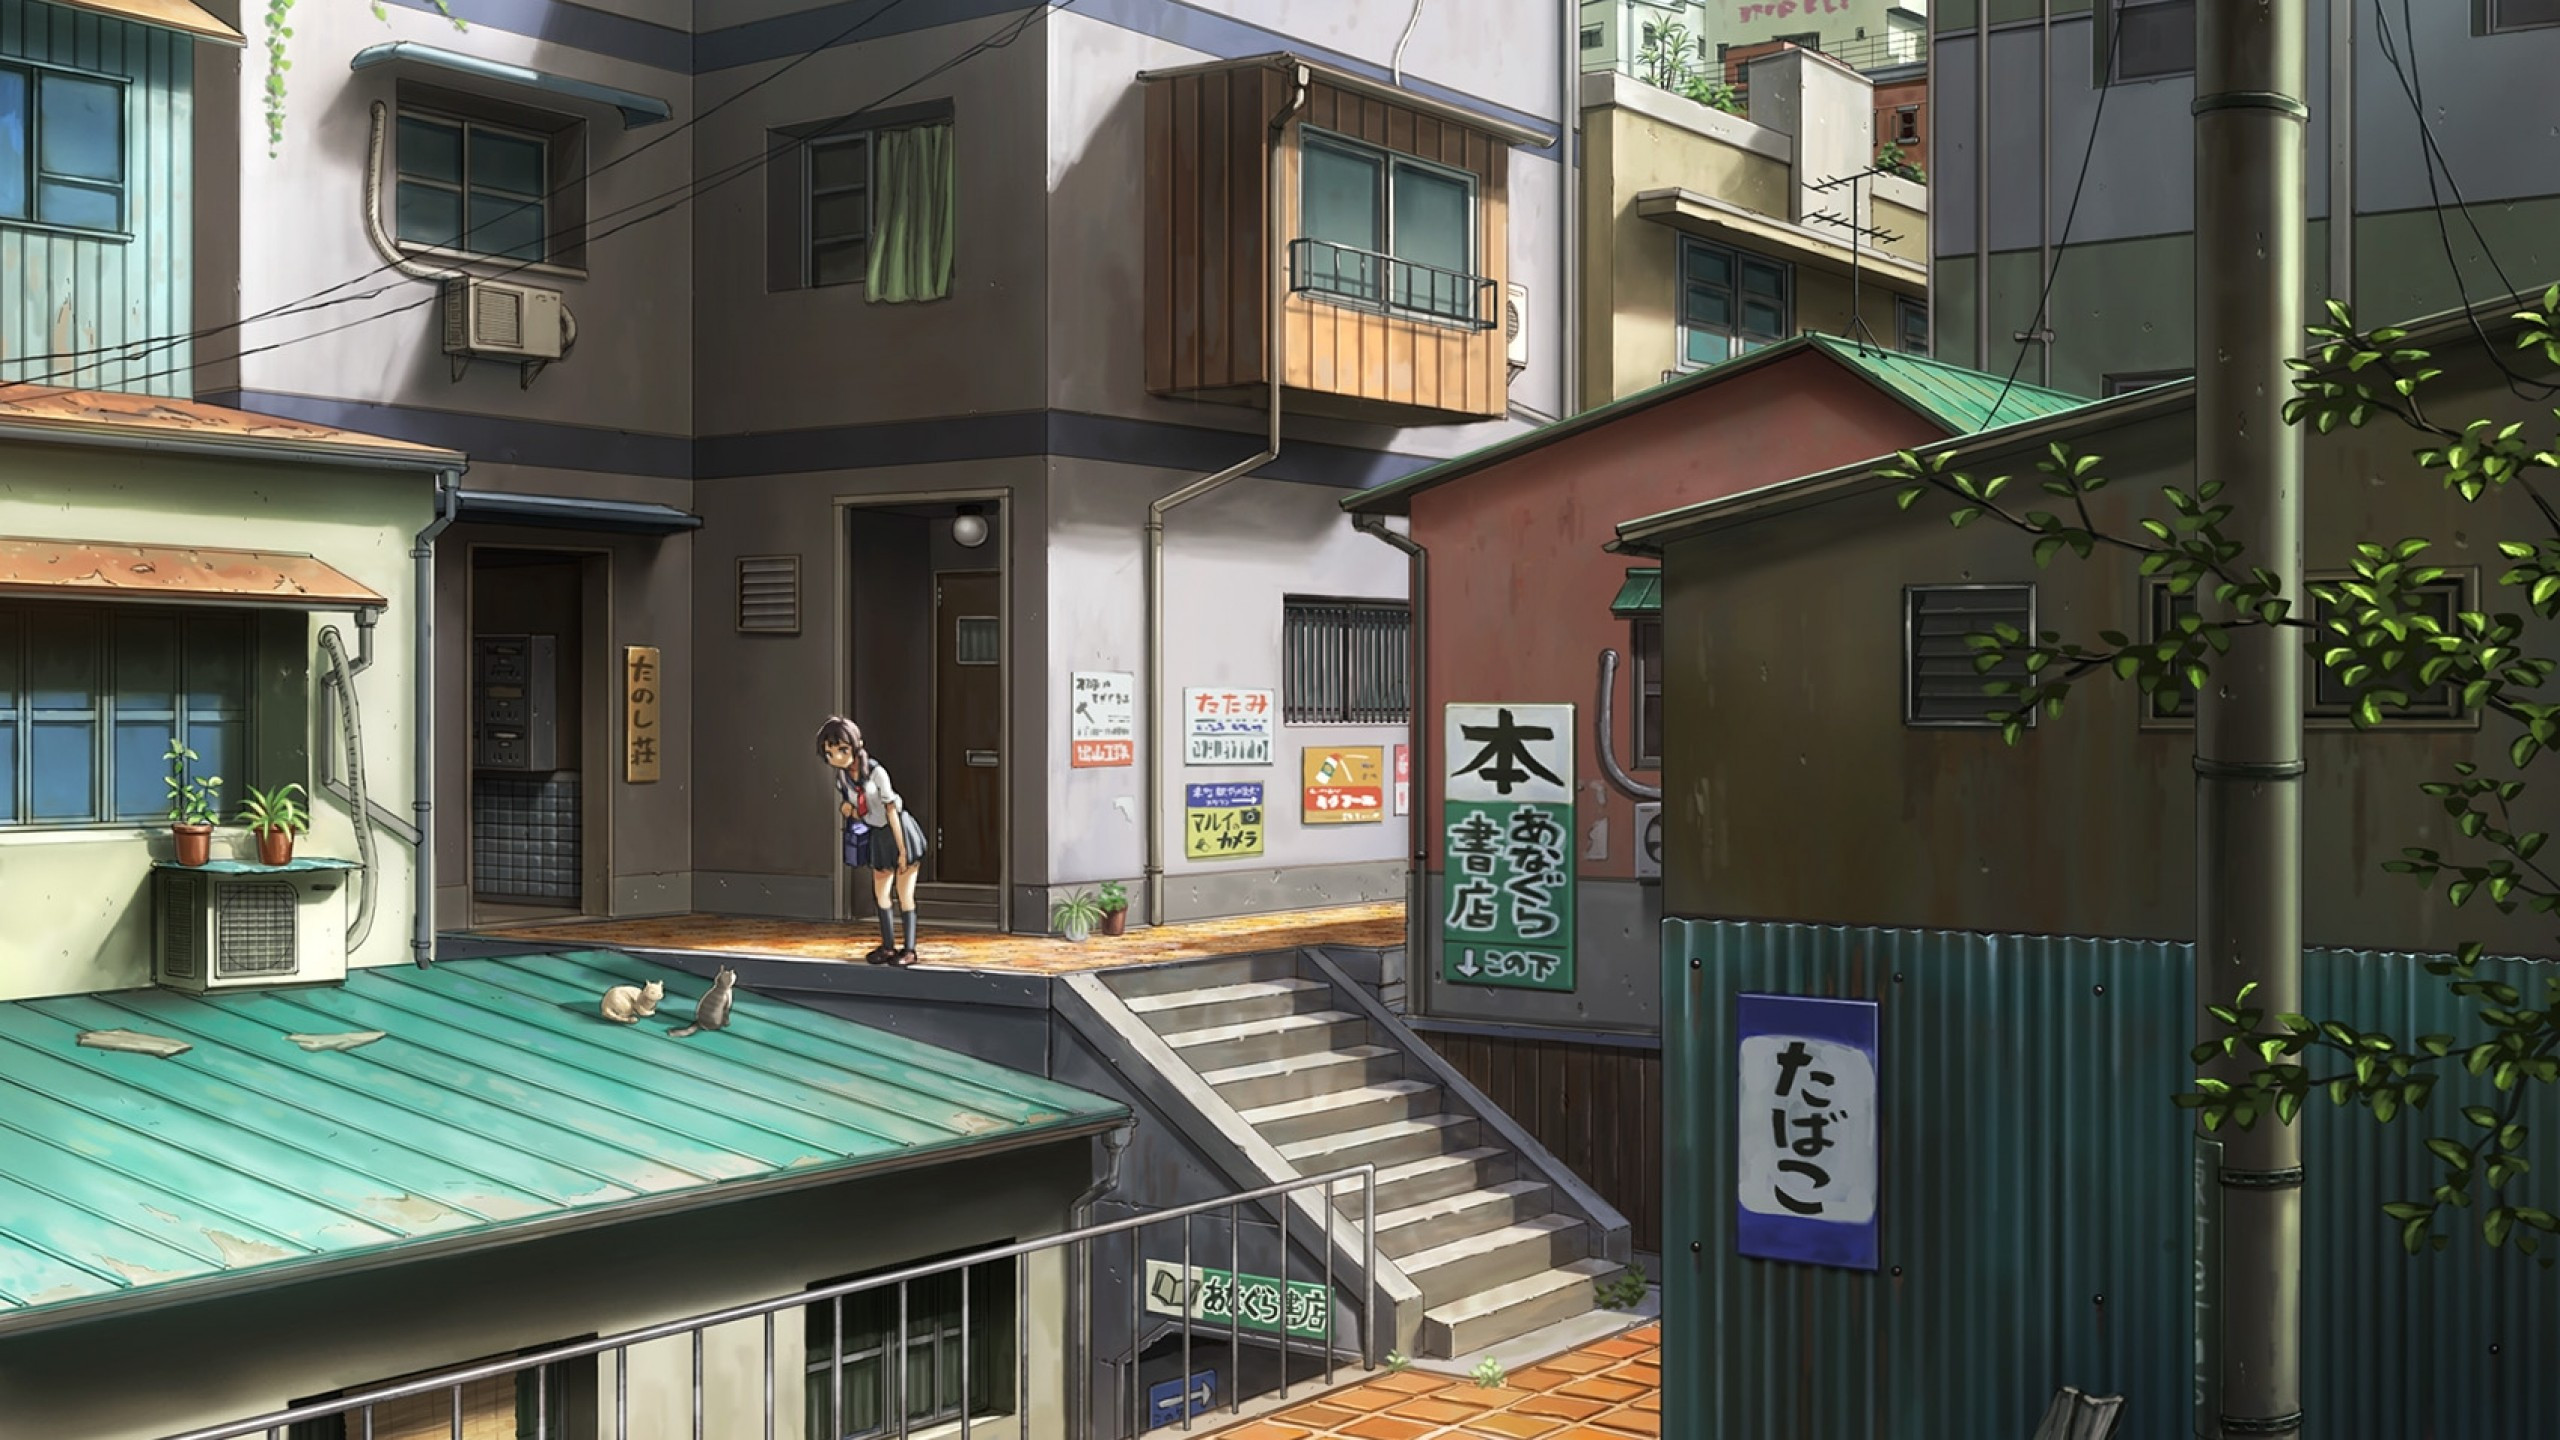 Download 2560x1440 Anime Streets, Buildings, Cats, Warm, Stairs Wallpaper for iMac 27 inch